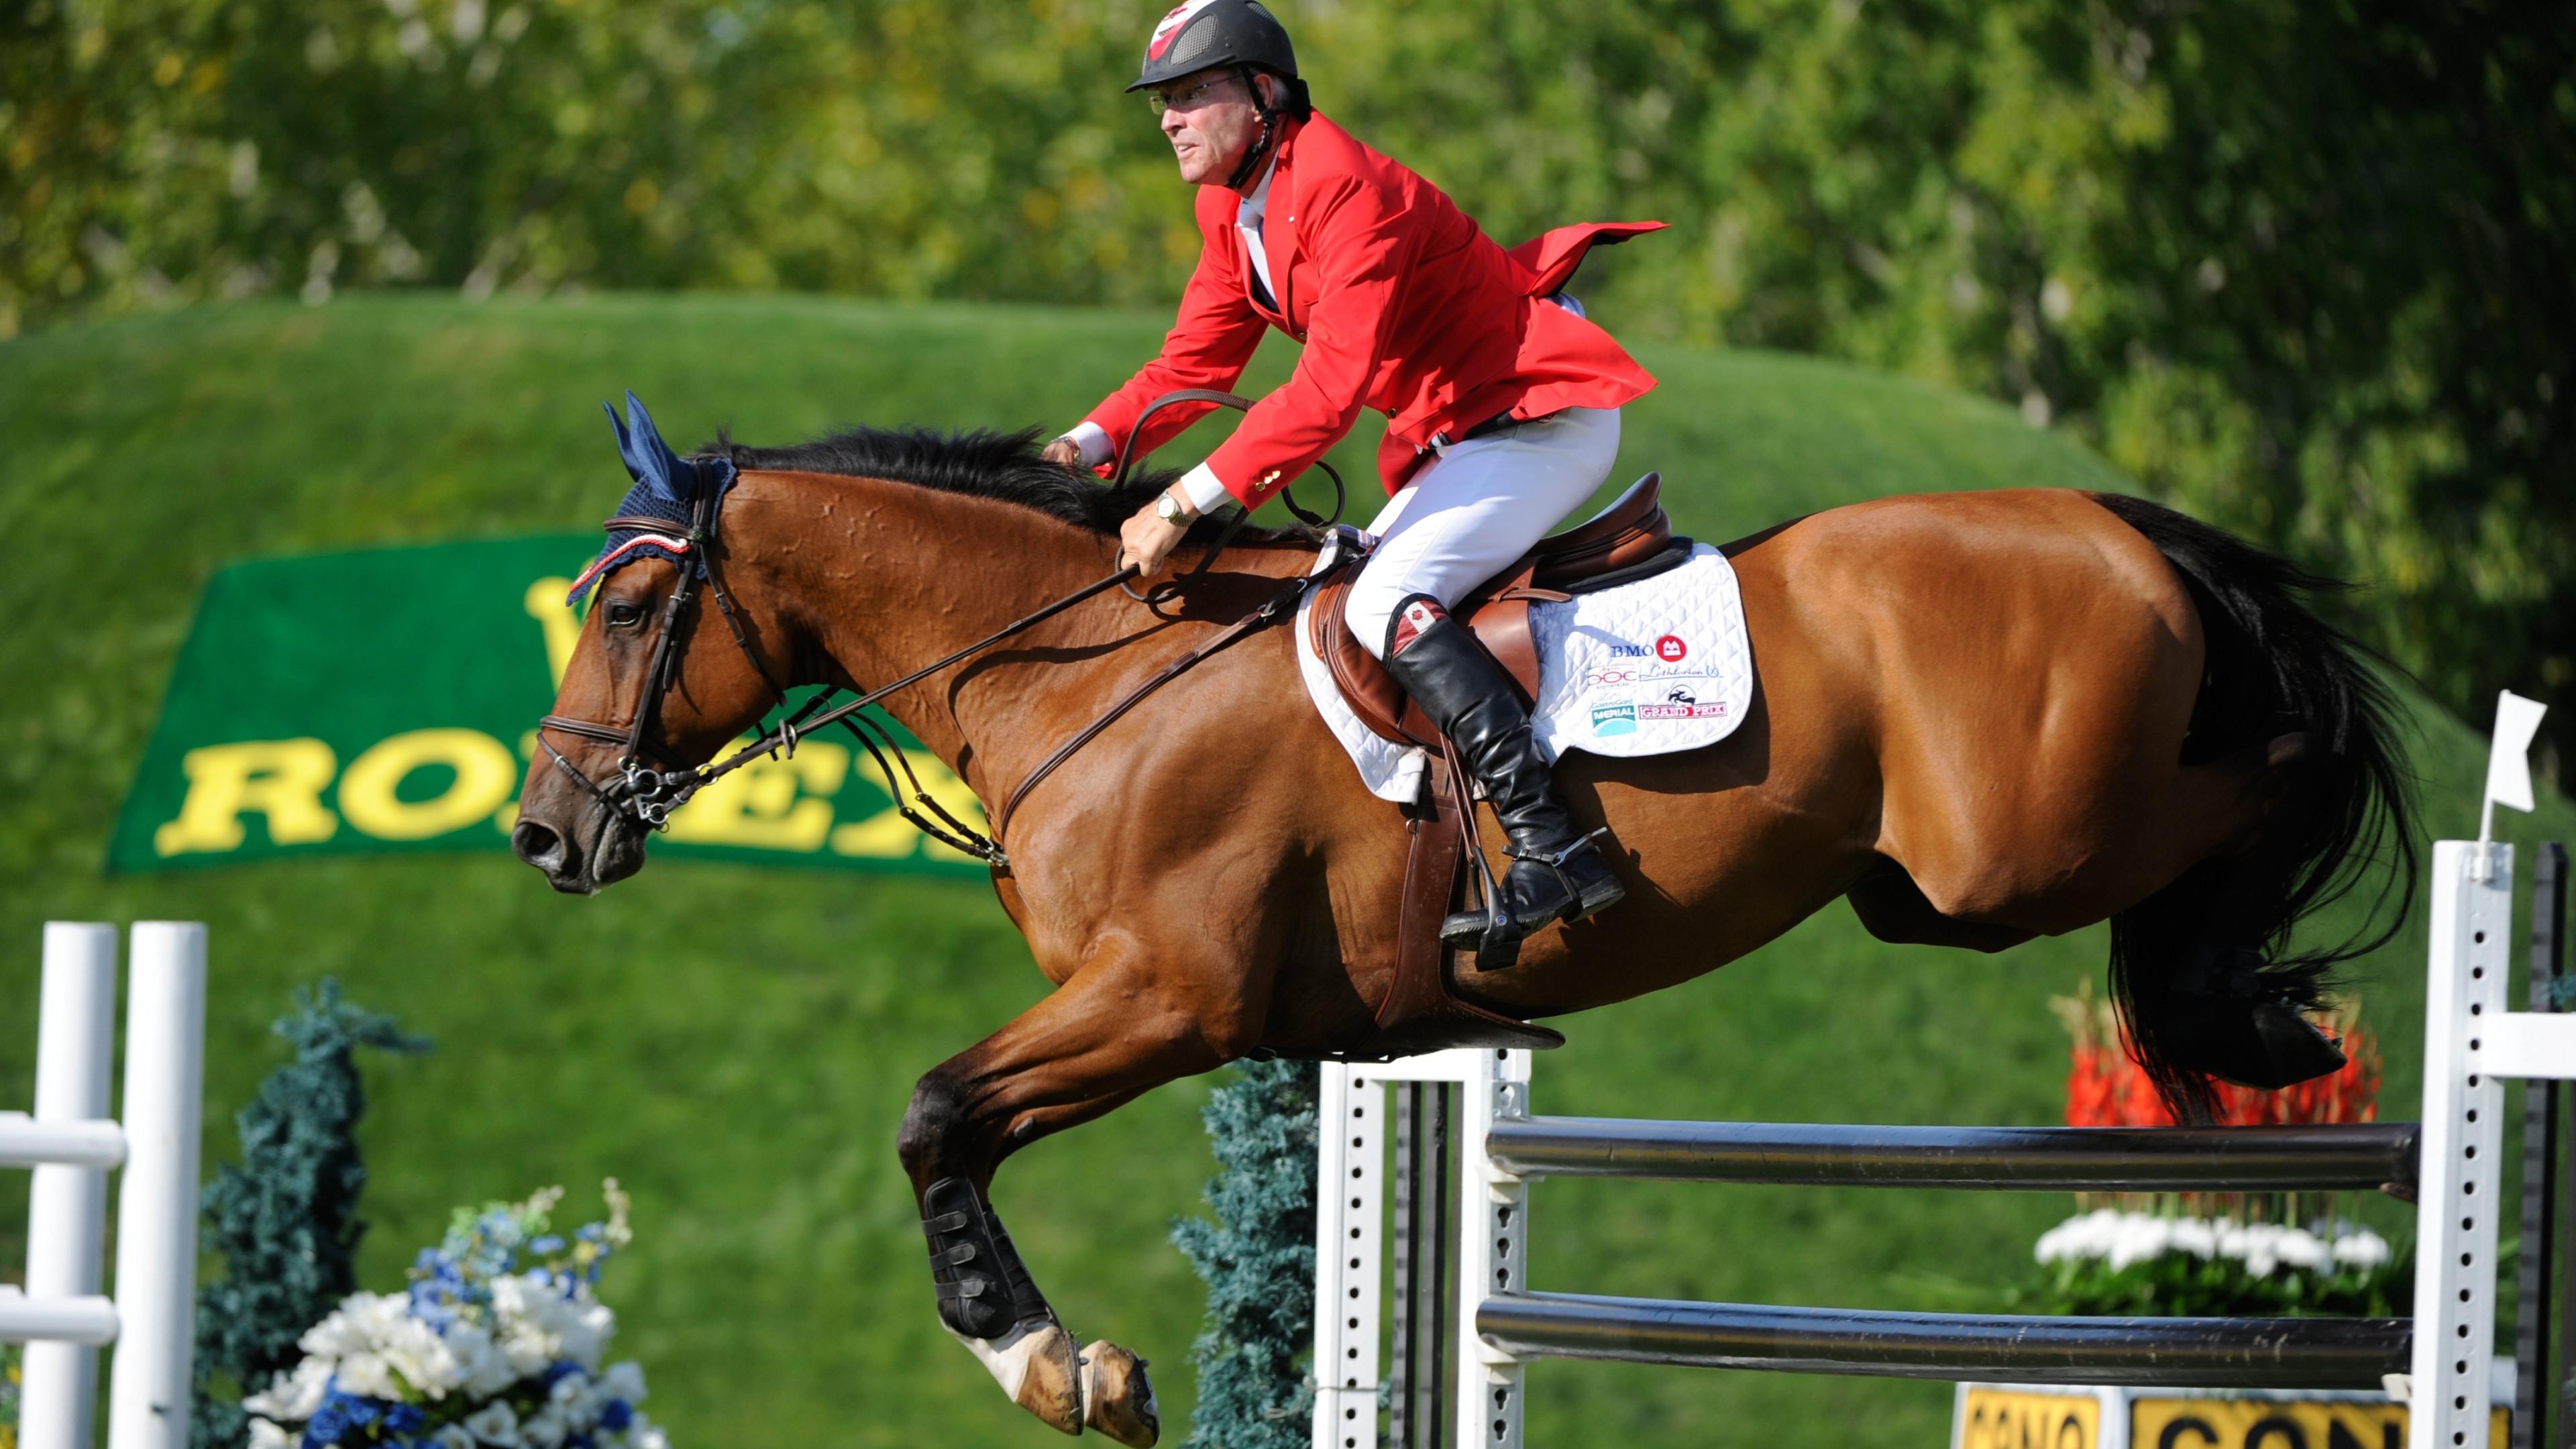 Eventing: Jump racing, Similar to flat racing but the horses also have to race over obstacles. 3840x2160 4K Background.